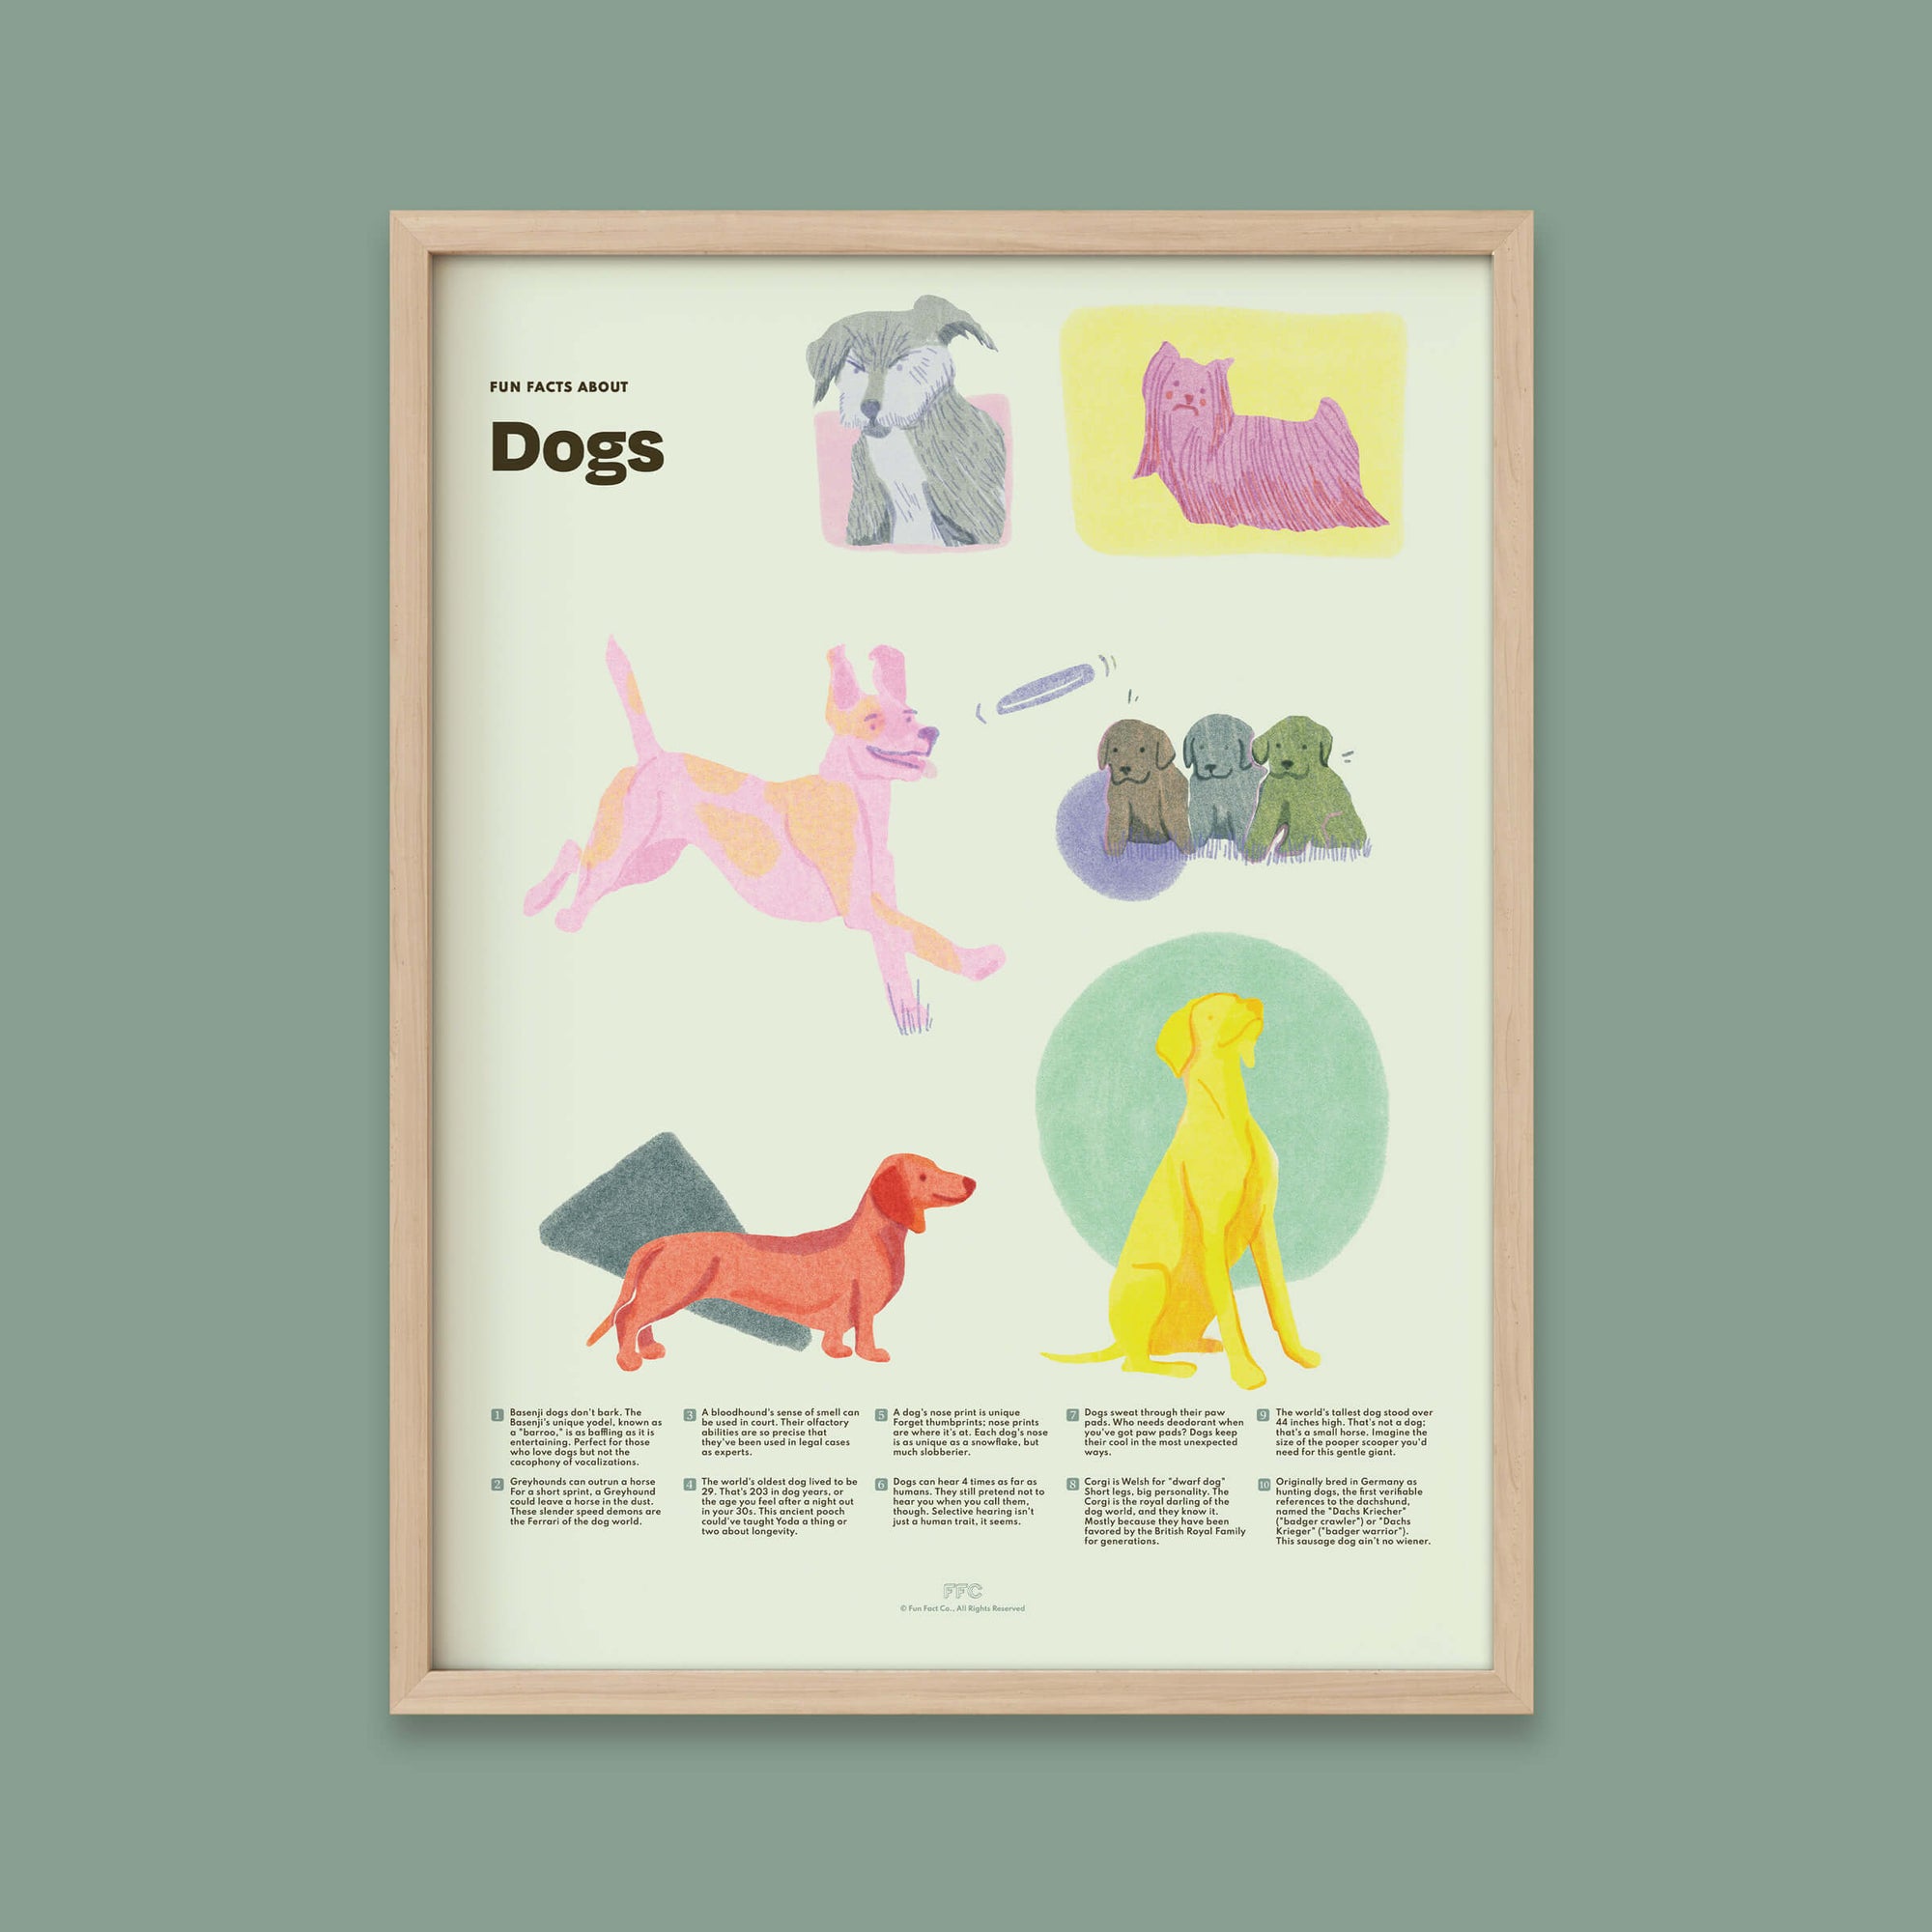 Dog Fun Facts Print, Educational Dog Poster by Fun Fact Co. - Natural Frame